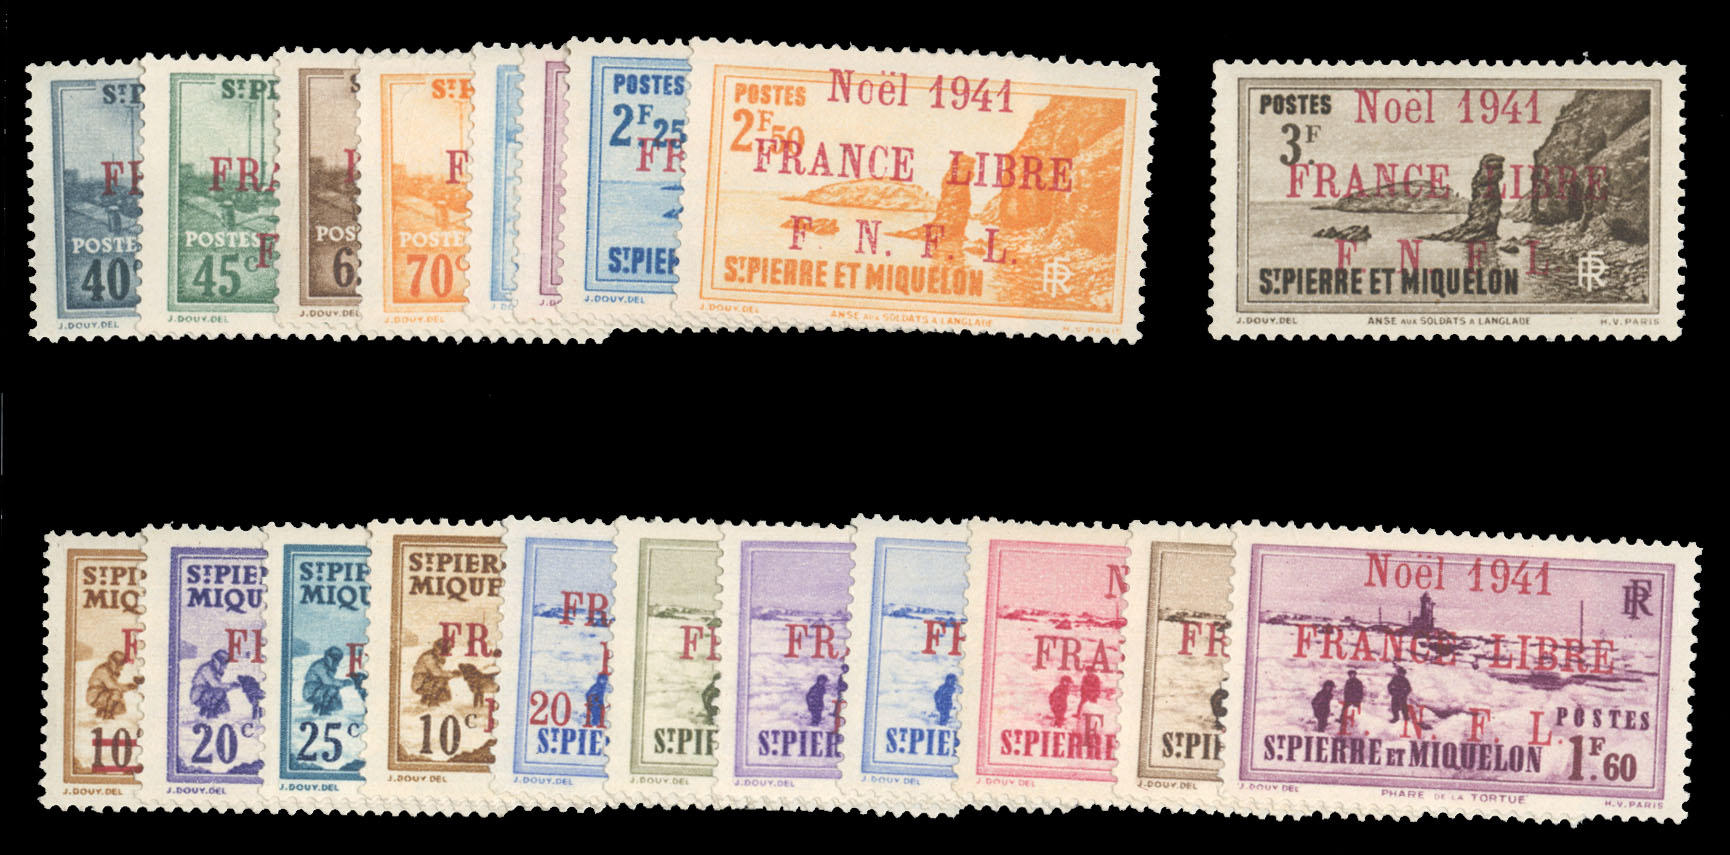 Lot 493 - FRENCH COLONIES Somali Coast  -  Cherrystone Auctions U.S. & Worldwide Stamps & Postal History